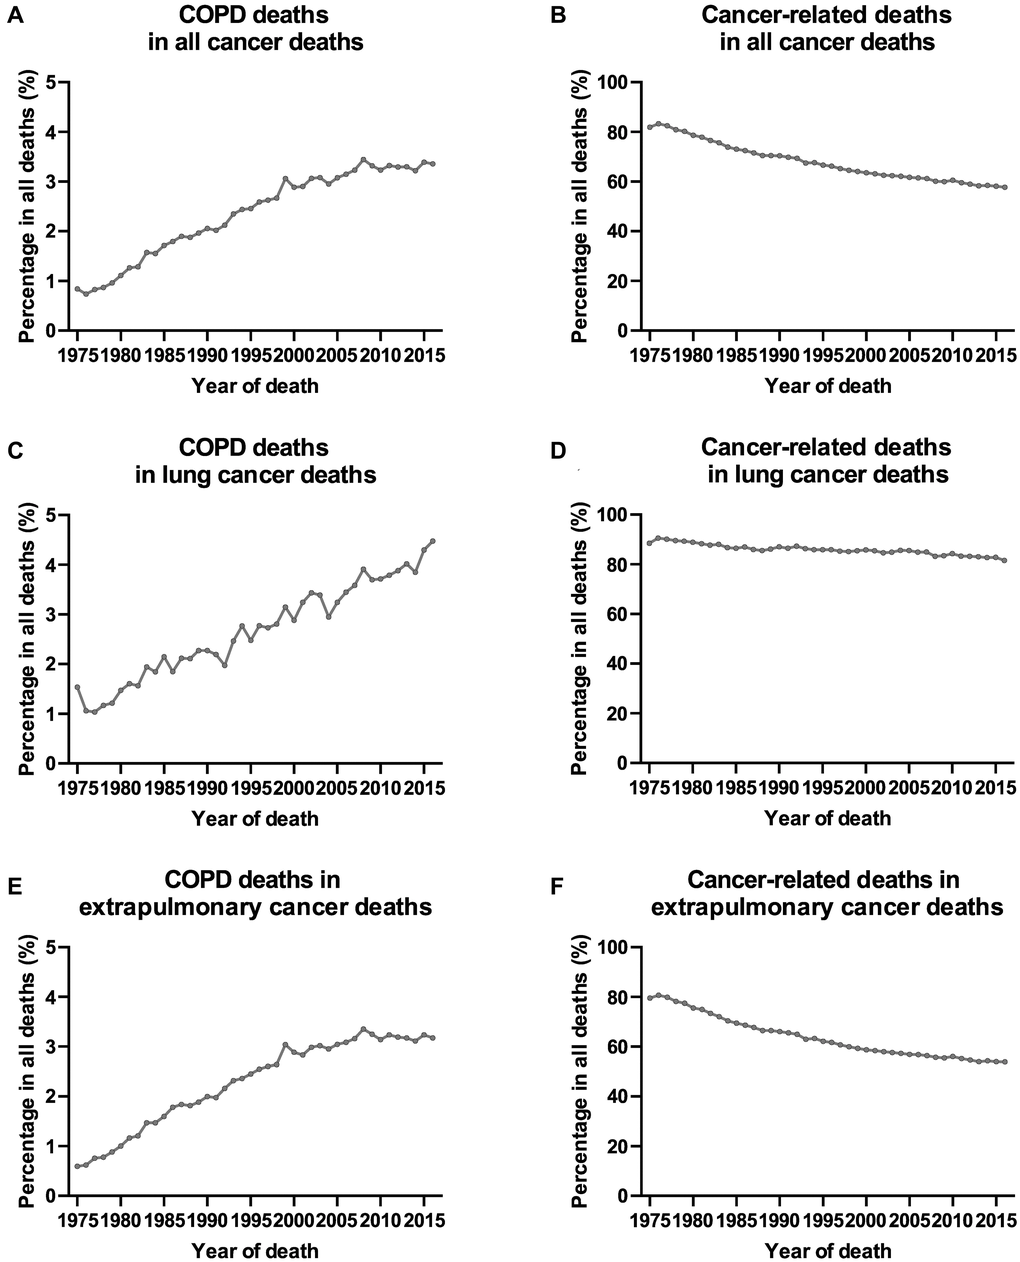 Trends of COPD deaths and cancer-related deaths among all cancer deaths in SEER 9 registries by calendar year of death. (A) Trends of COPD deaths among all cancer deaths in SEER 9 registries by calendar year of death; (B) trends of cancer-related deaths among all cancer deaths in SEER 9 registries by calendar year of death; (C) trends of COPD deaths among lung cancer deaths in SEER 9 registries by calendar year of death; (D) trends of cancer-related deaths among lung cancer deaths in SEER 9 registries by calendar year of death; (E) trends of COPD deaths among extrapulmonary cancer deaths in SEER 9 registries by calendar year of death; (F) trends of cancer-related deaths among extrapulmonary cancer deaths in SEER 9 registries by calendar year of death.